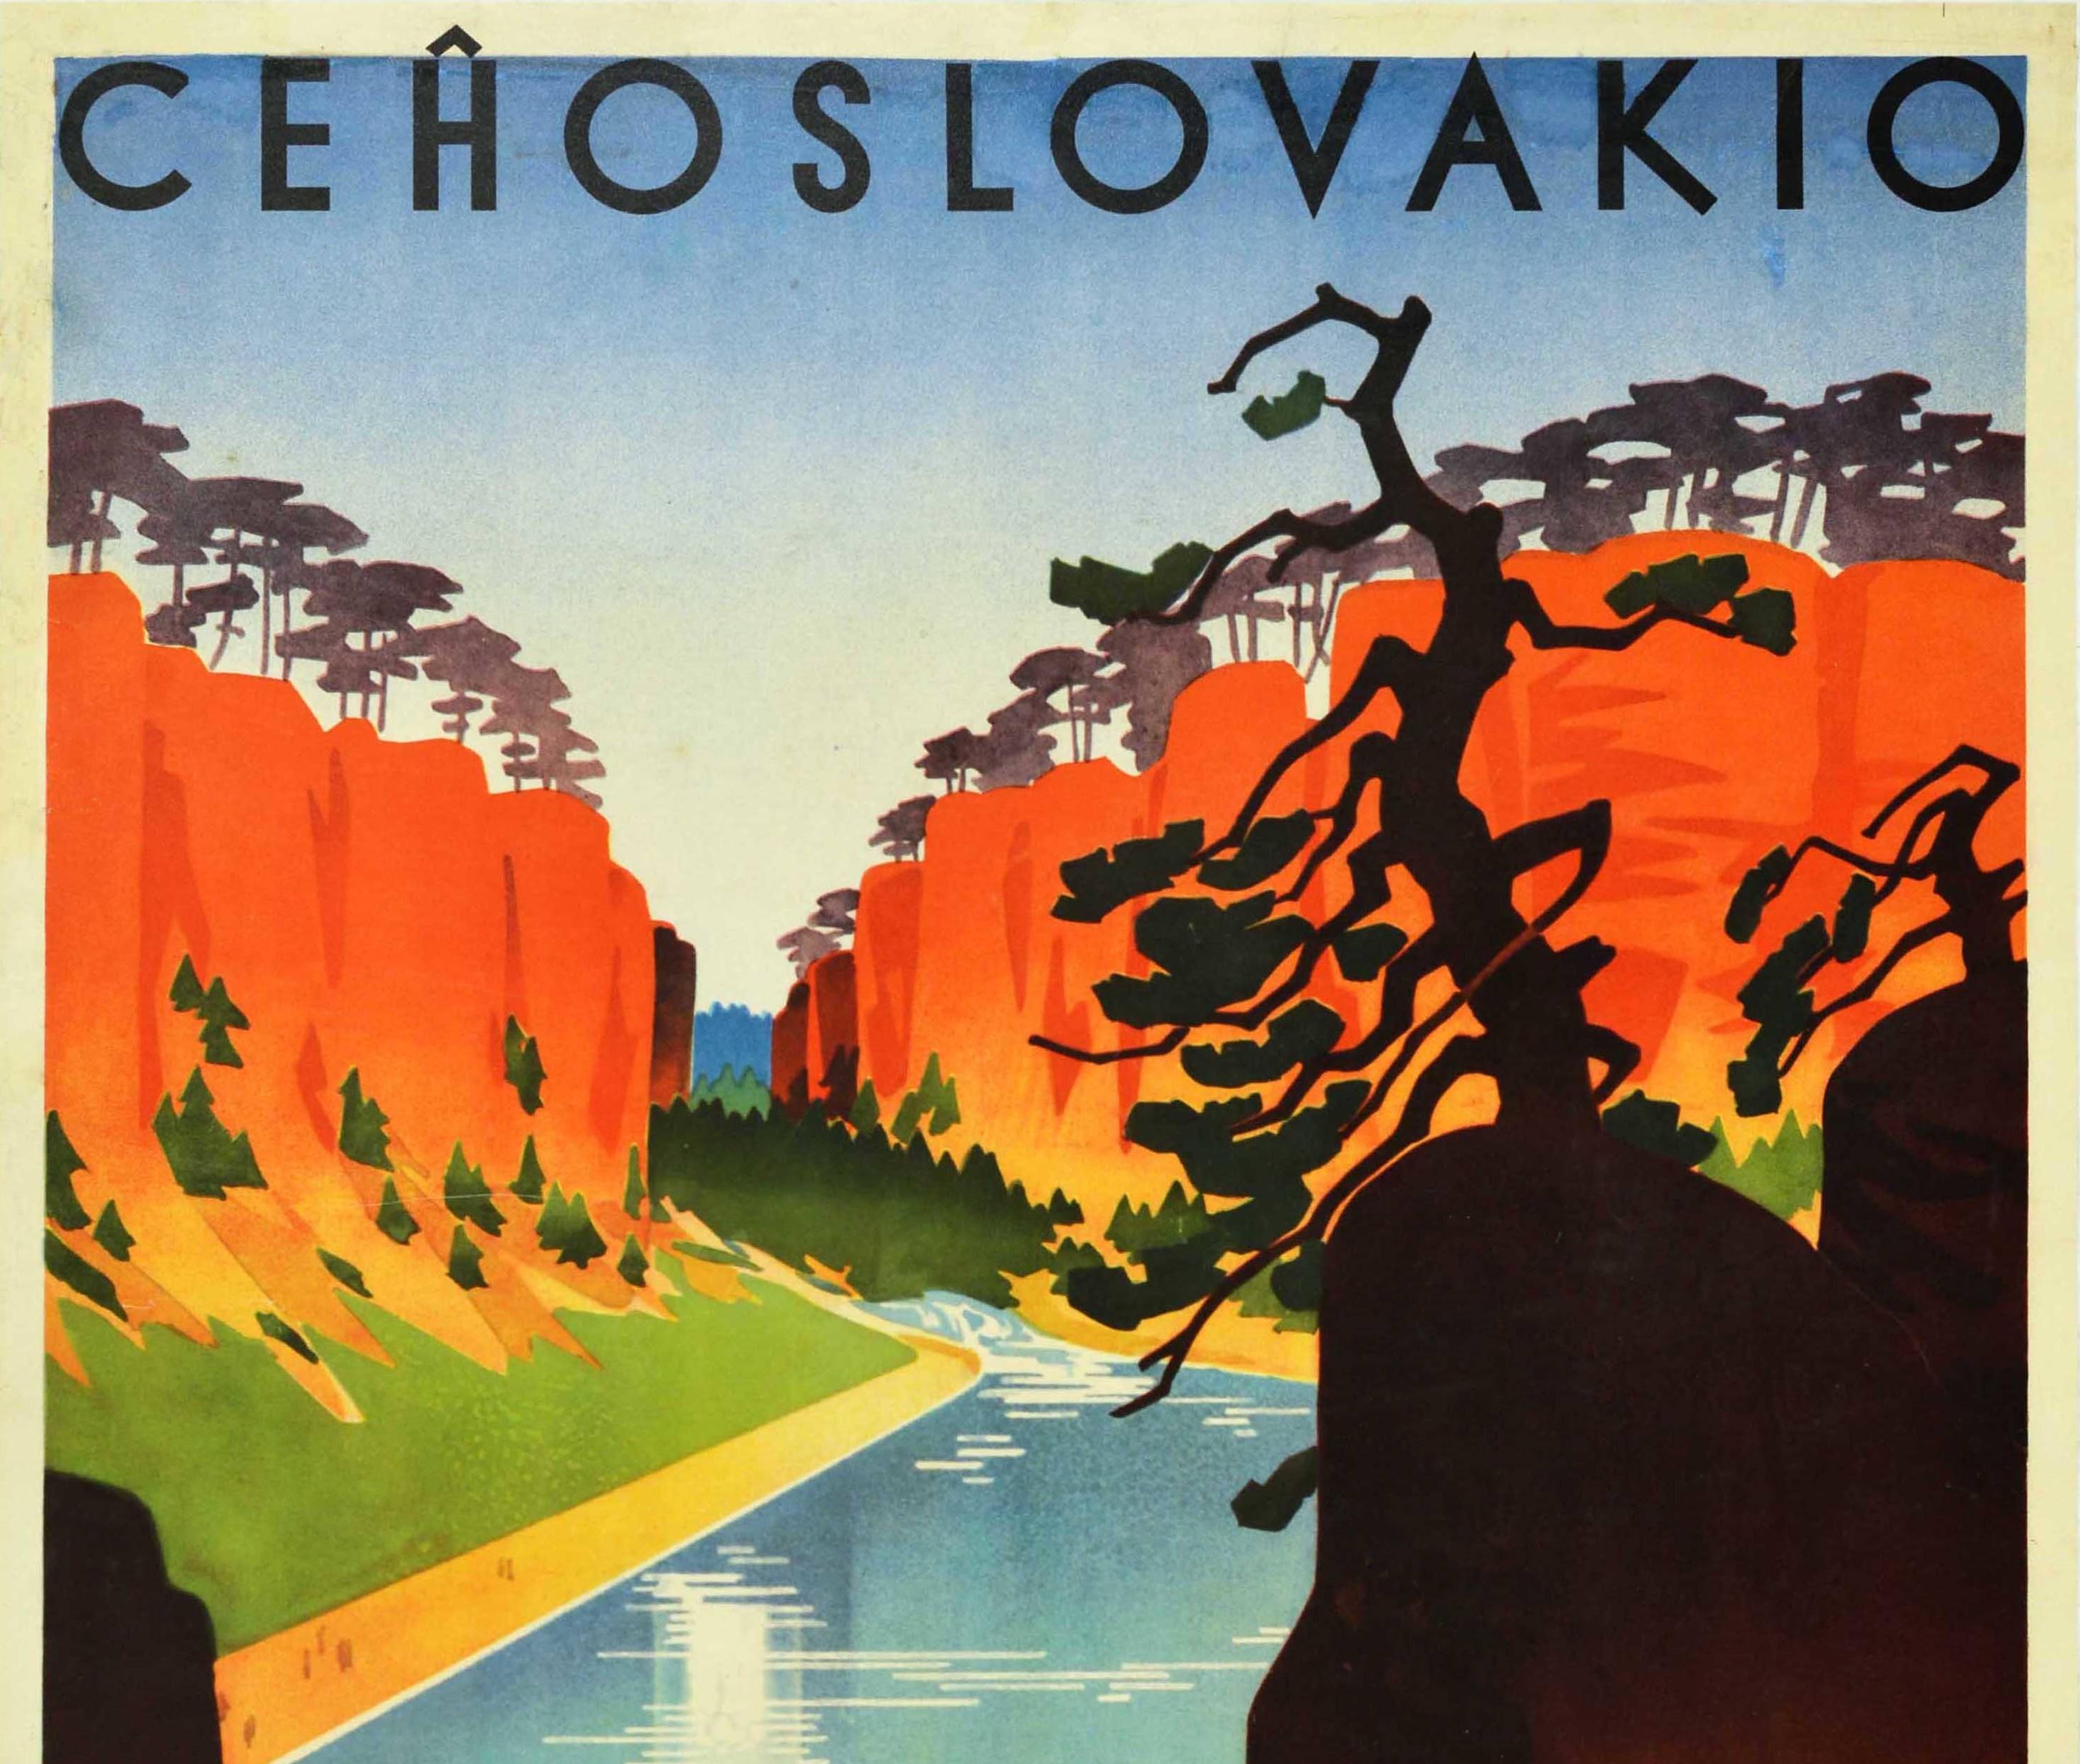 Original vintage travel poster published by Czechoslovak State Railways for Jicin and the Prachov Rocks / Rockaro de Prachov featuring a stunning image of people and red and white striped sun umbrellas on a sandy beach by the calm water reflecting